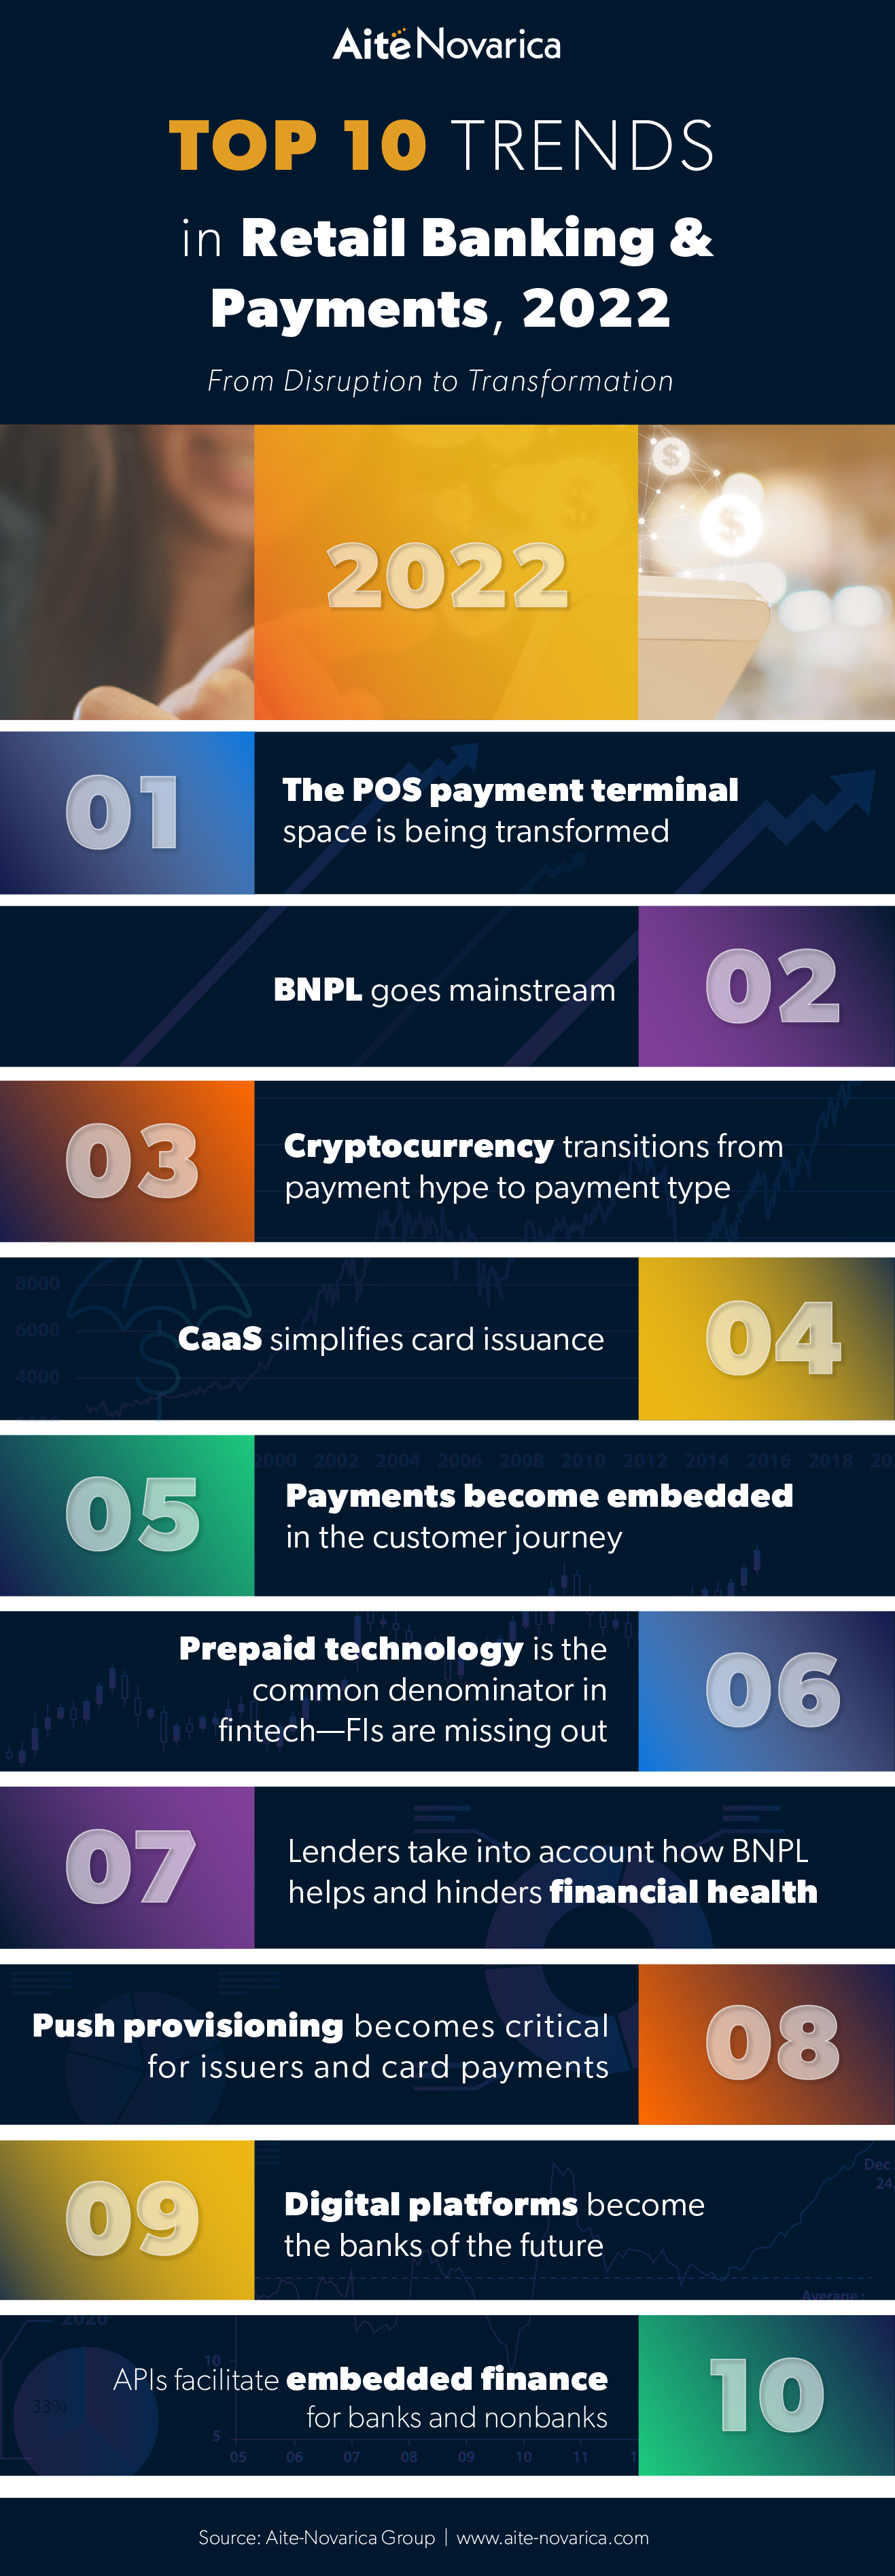 Top 10 Trends in Retail Banking & Payments, 2022 From Disruption to Transformation AiteNovarica